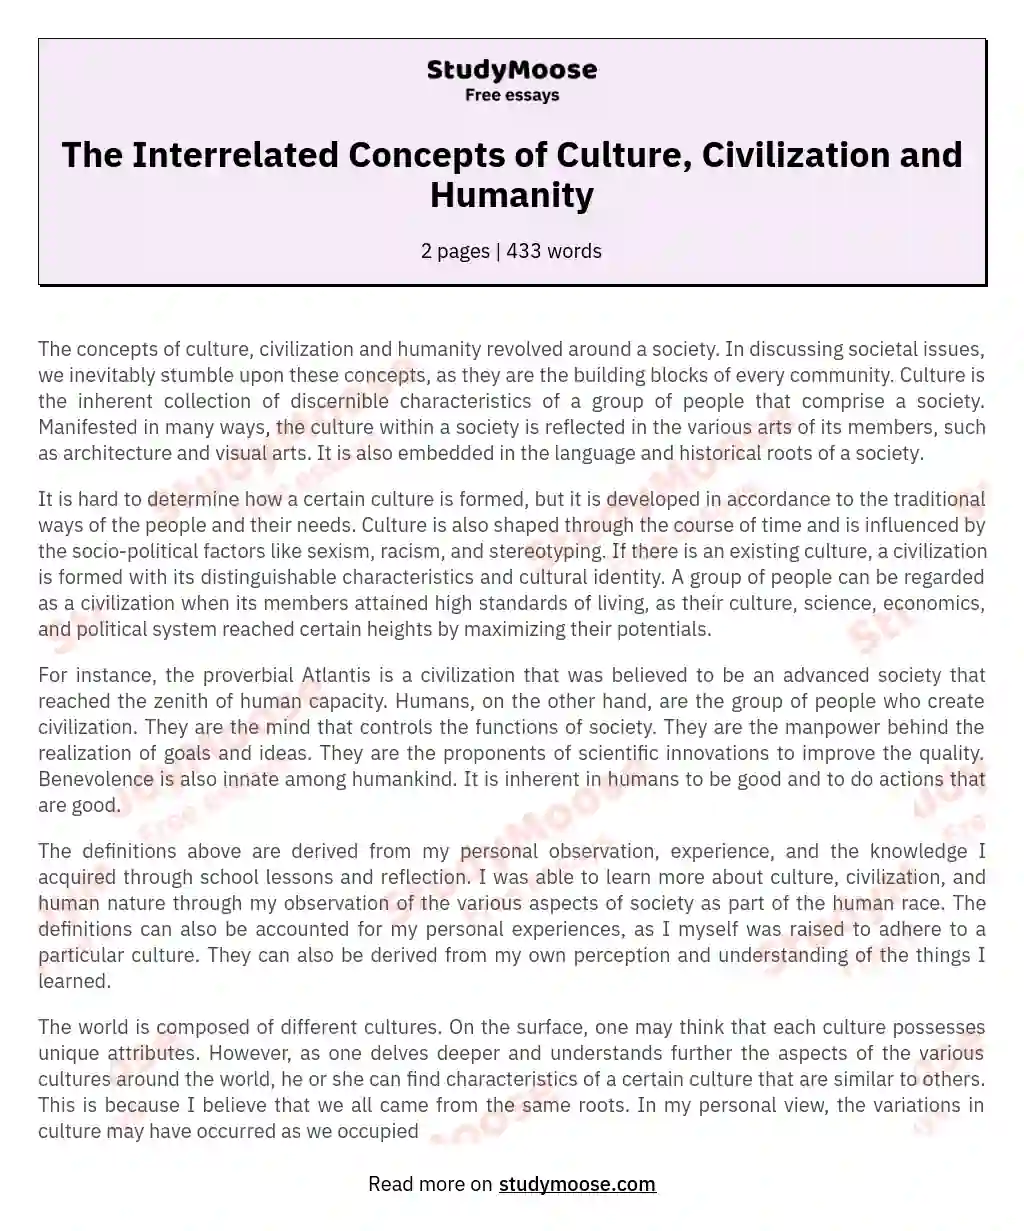 The Interrelated Concepts of Culture, Civilization and Humanity essay